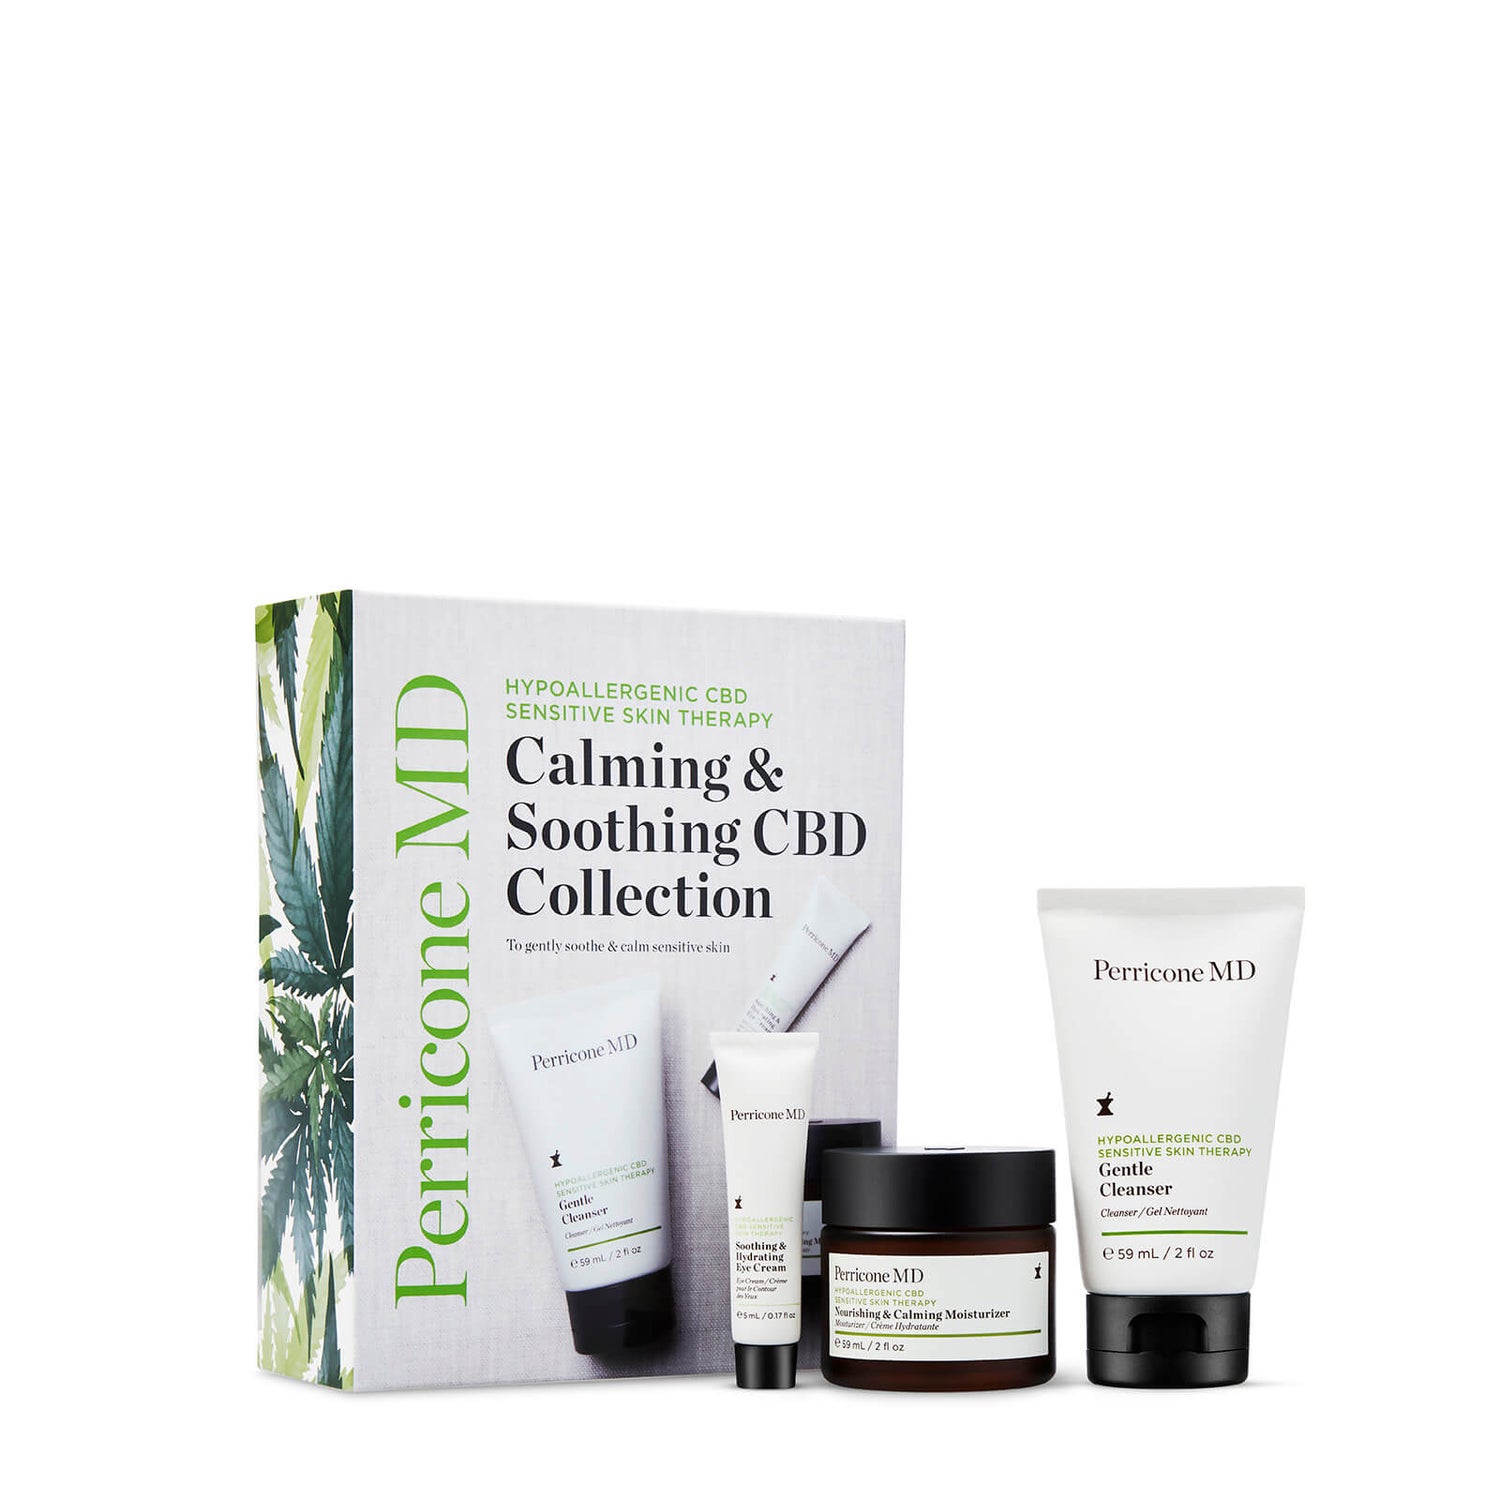 Hypoallergenic CBD Sensitive Skin Therapy Calming & Soothing CBD Collection (Worth £109)